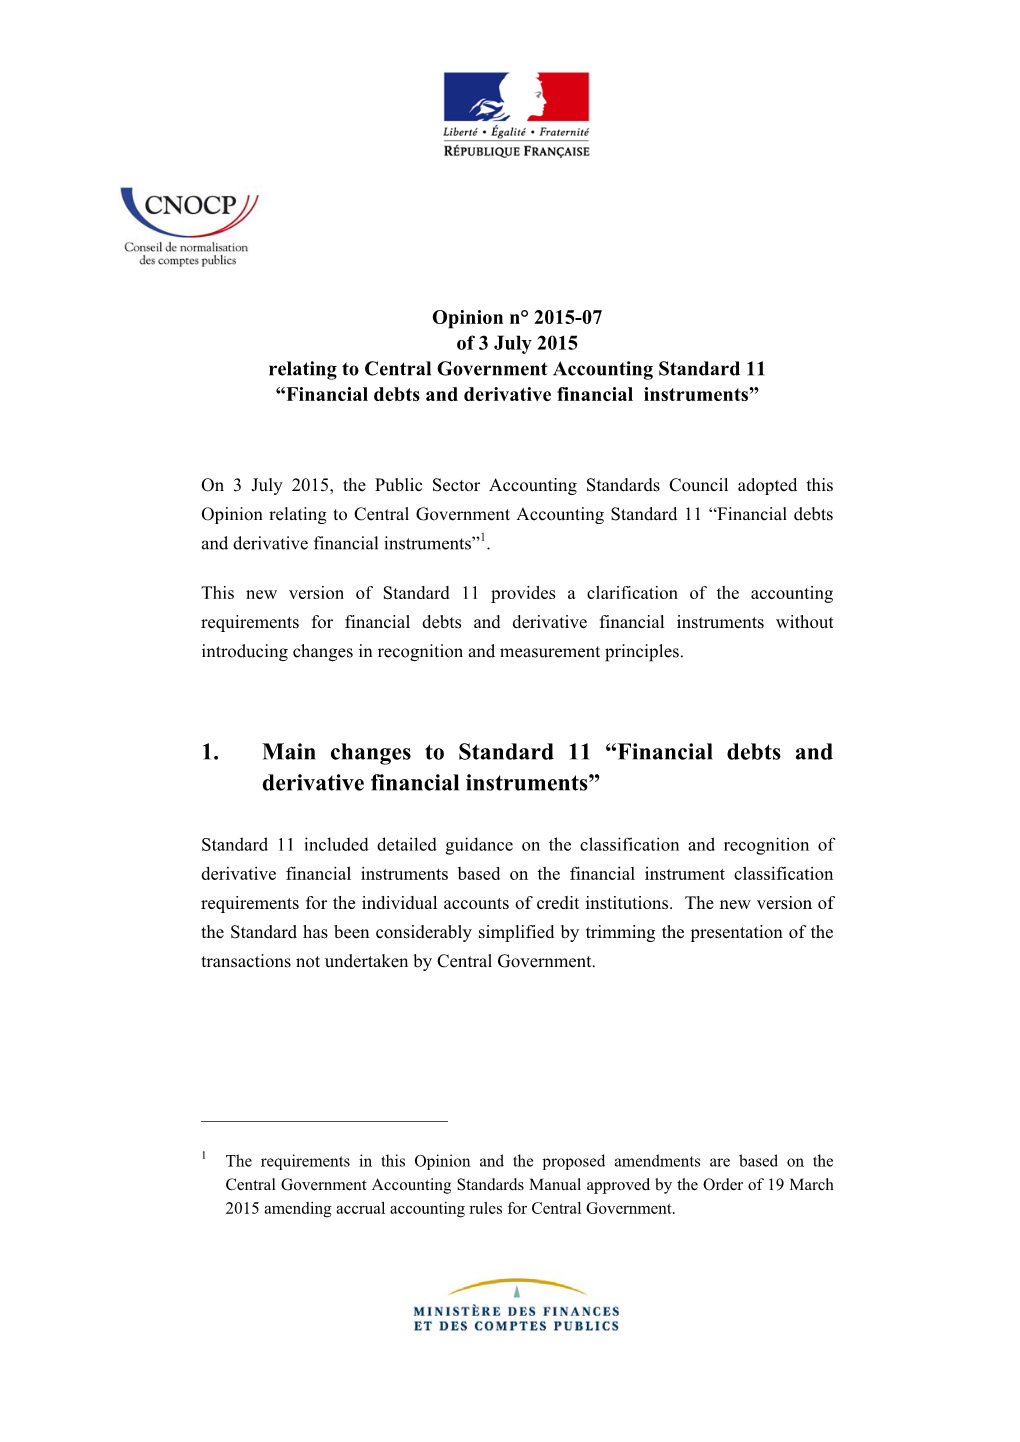 1. Main Changes to Standard 11 “Financial Debts and Derivative Financial Instruments”